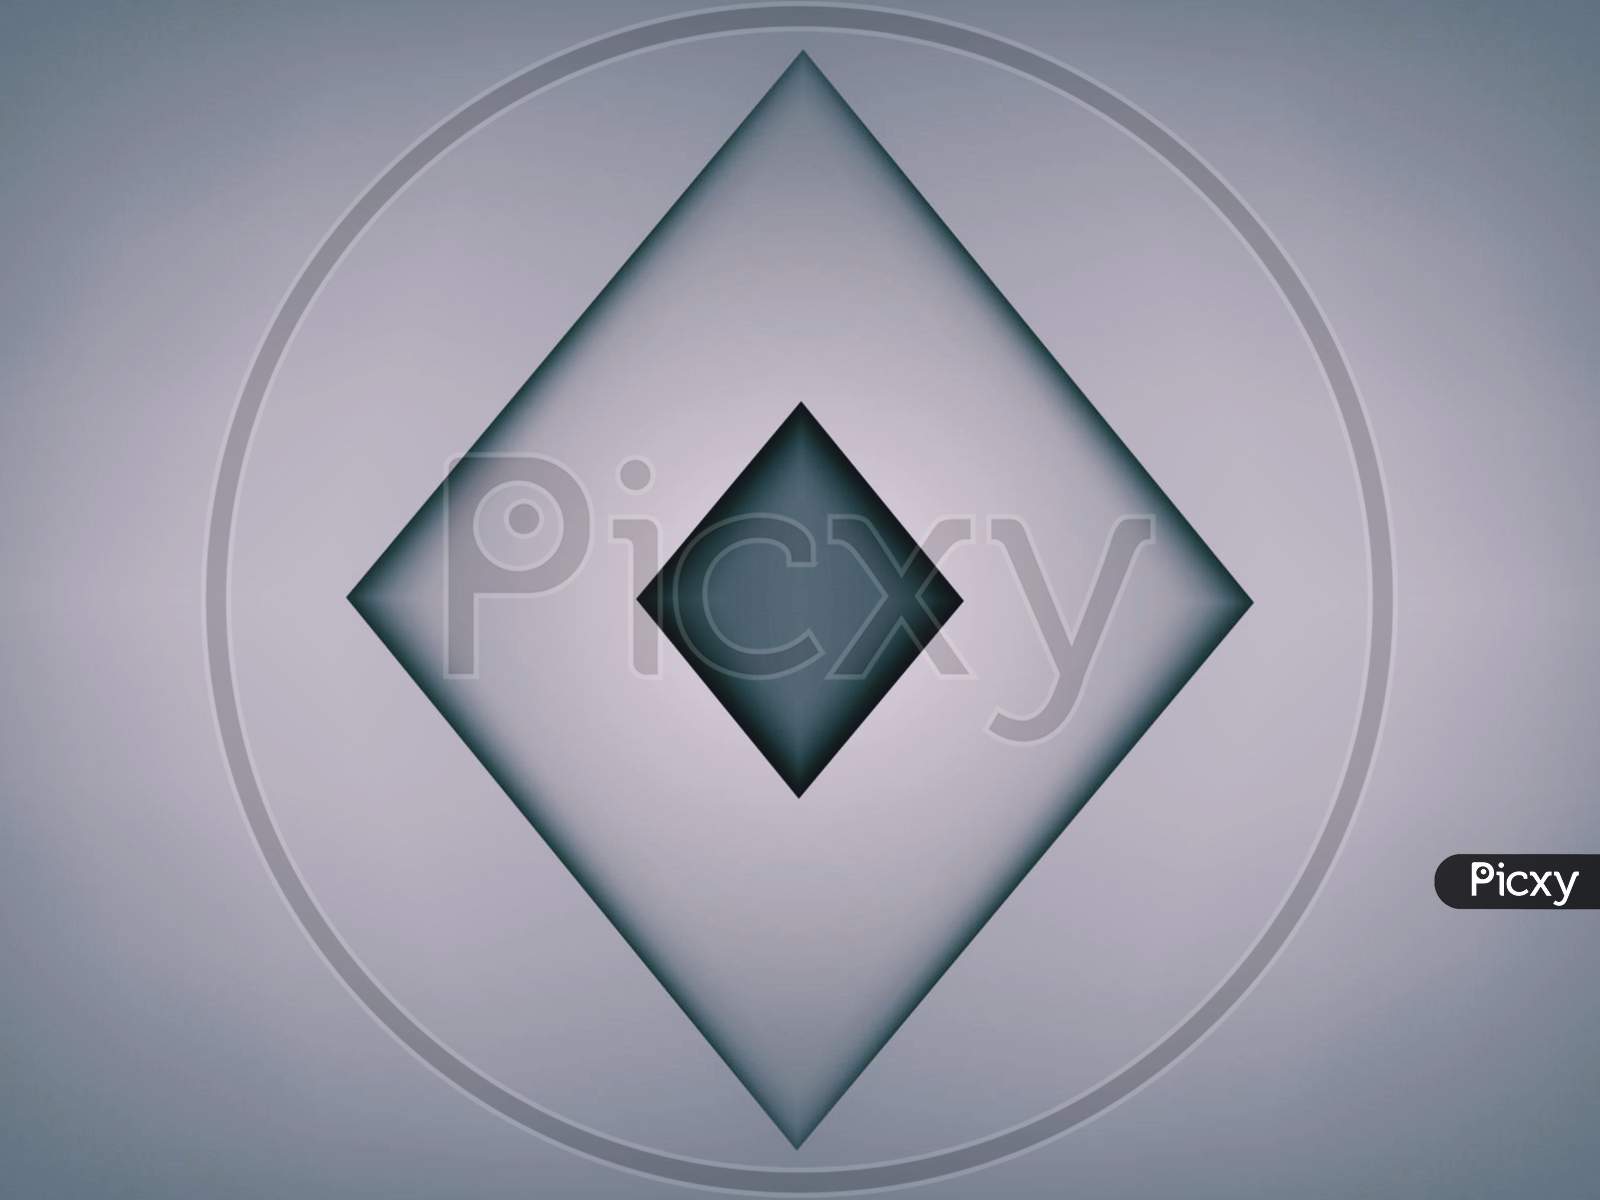 A creative geometry design abstract background.